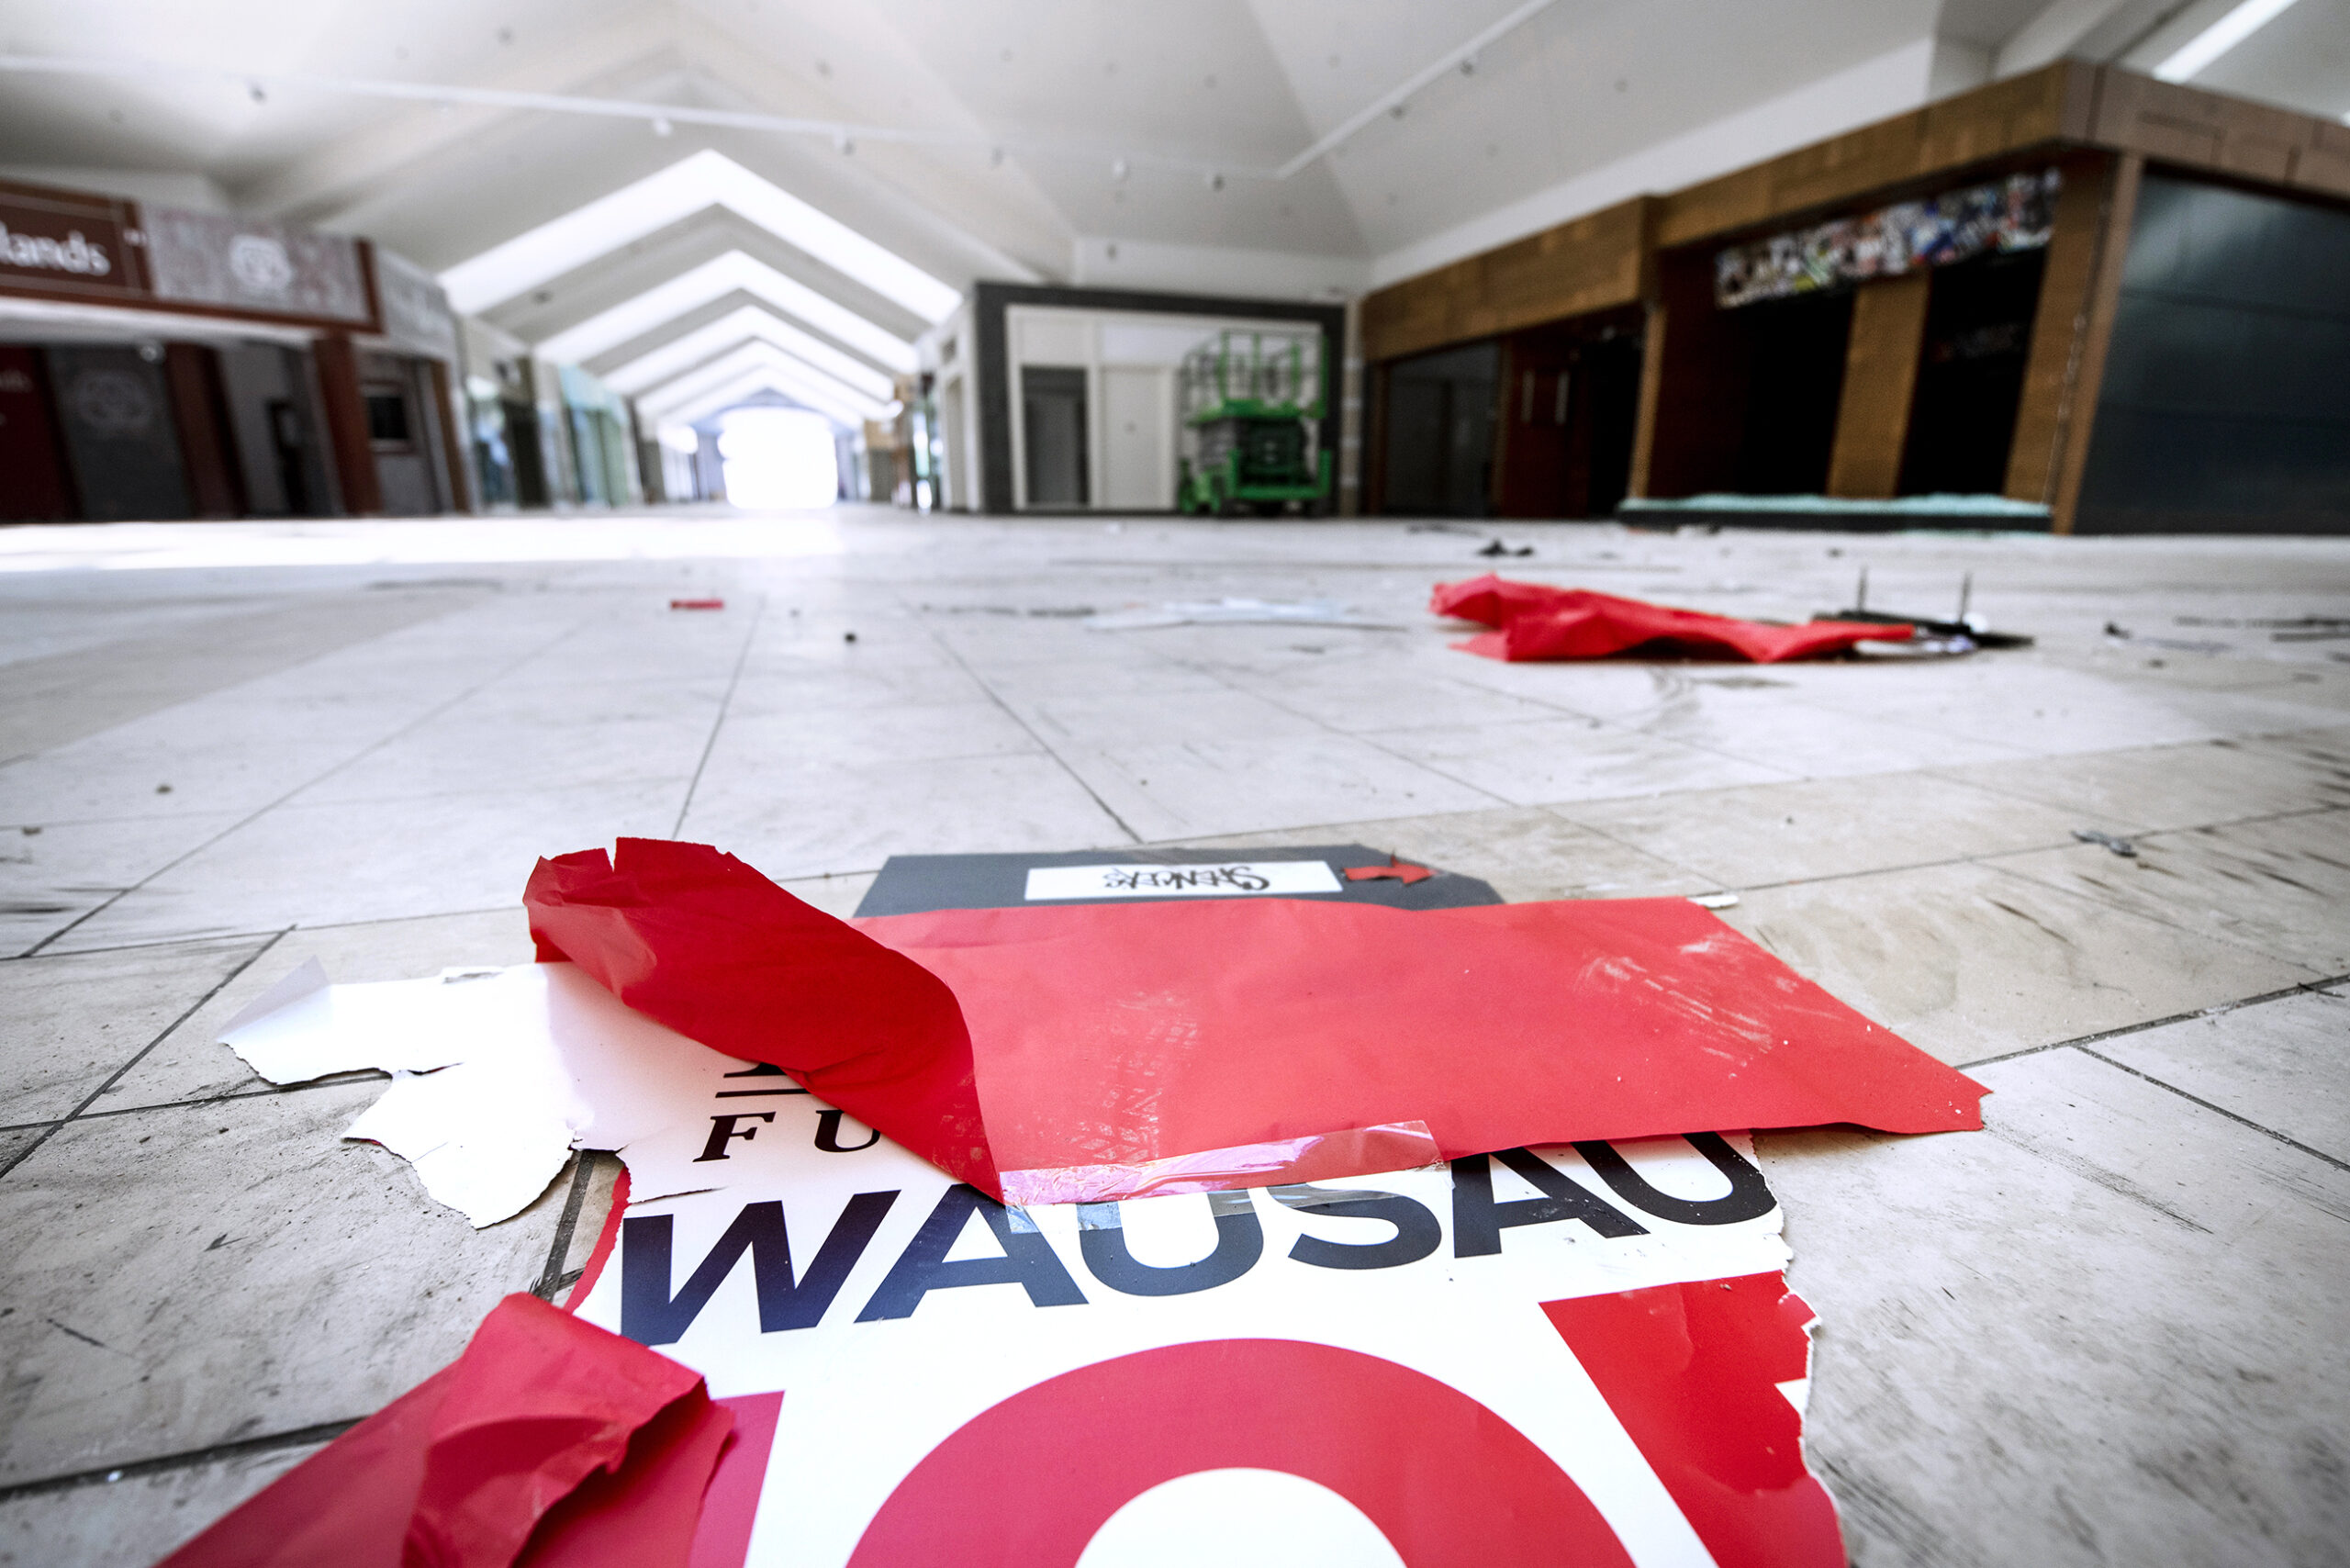 A ripped poster that says "WAUSAU" on it can be seen on a white tile floor inside of a mall.